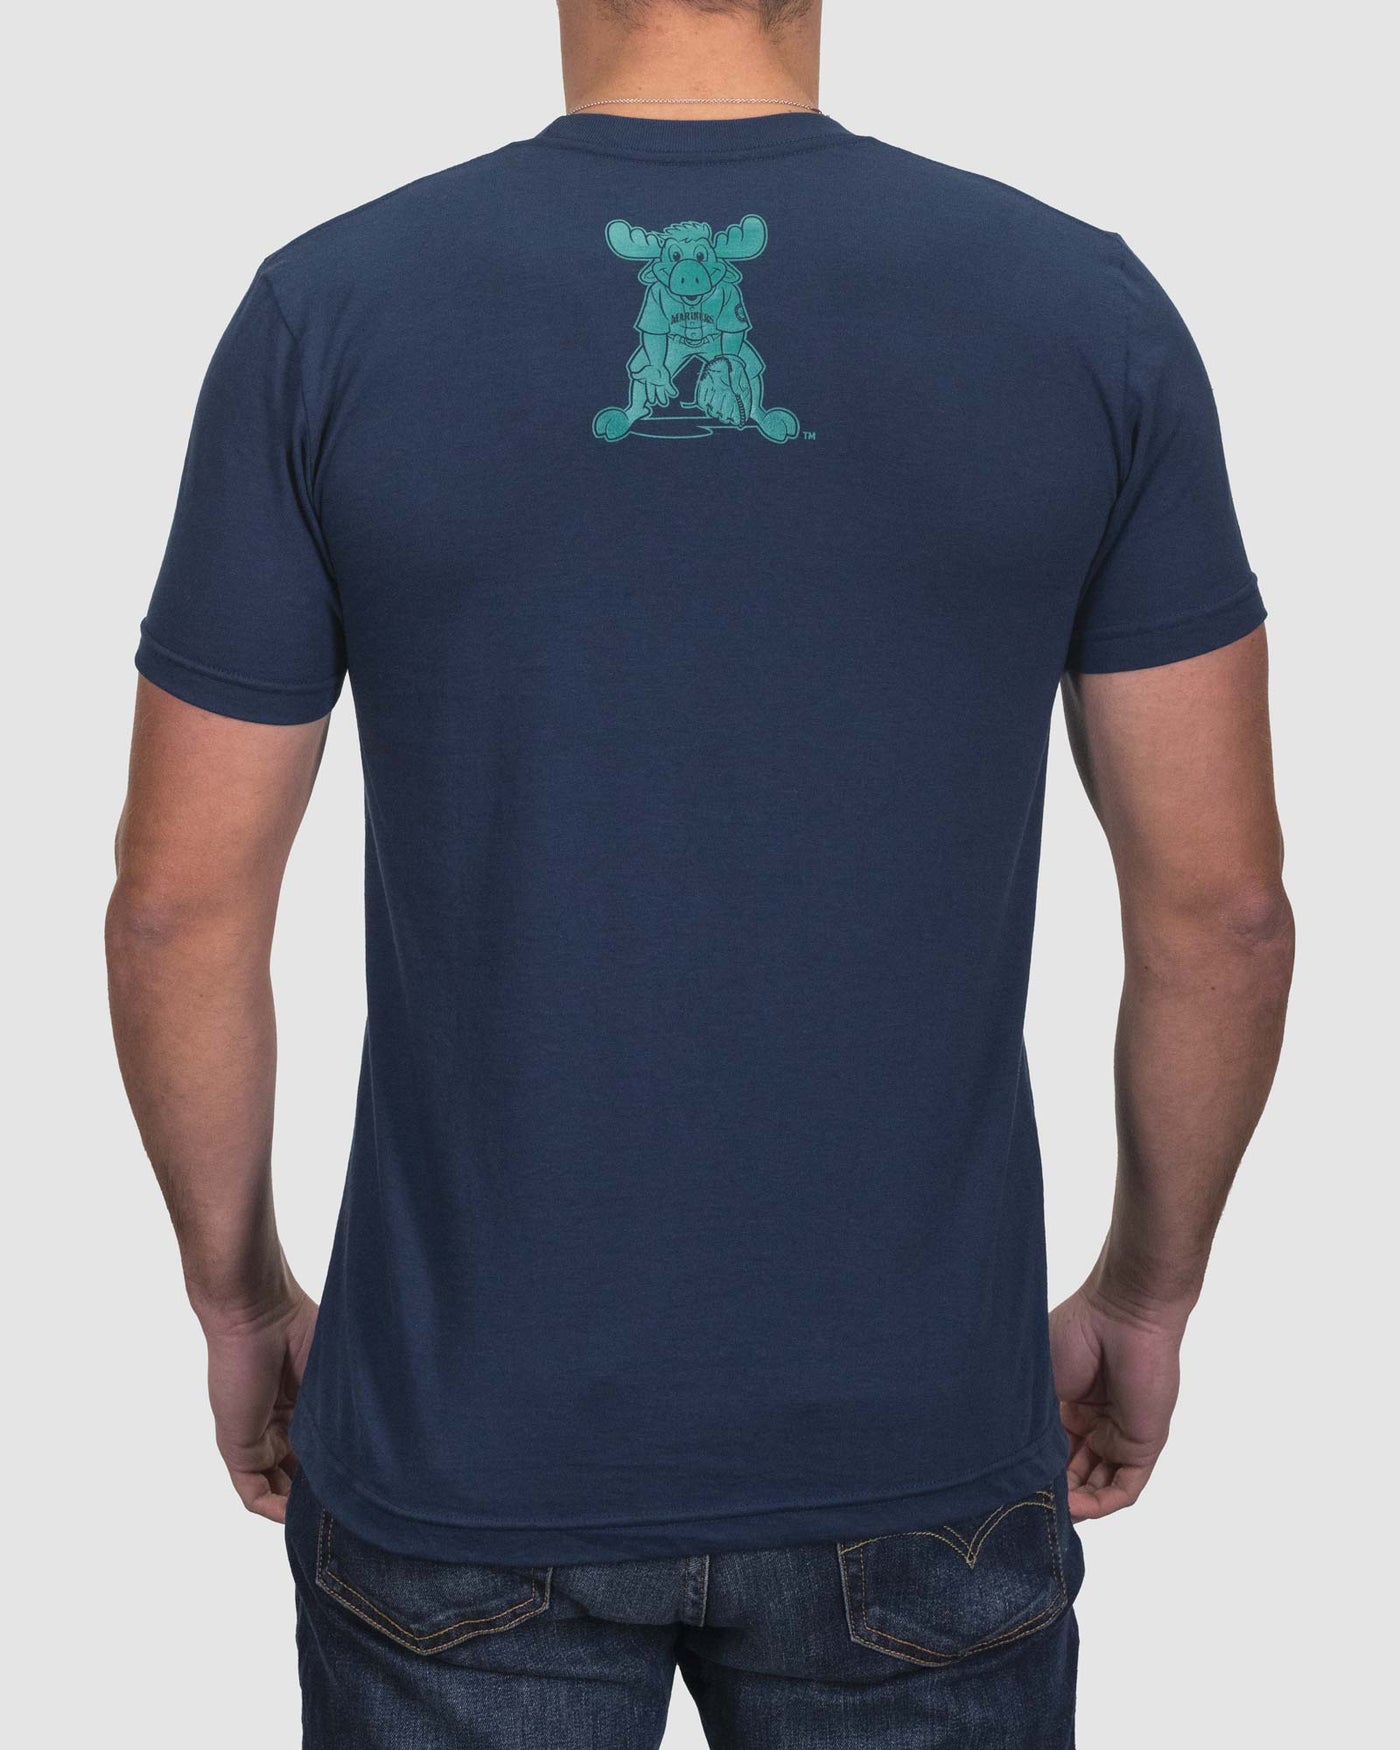  MLB Seattle Mariners Wordmark Traditional Navy Basic Youth T- Shirt, Traditional Navy, Small : Apparel : Sports & Outdoors